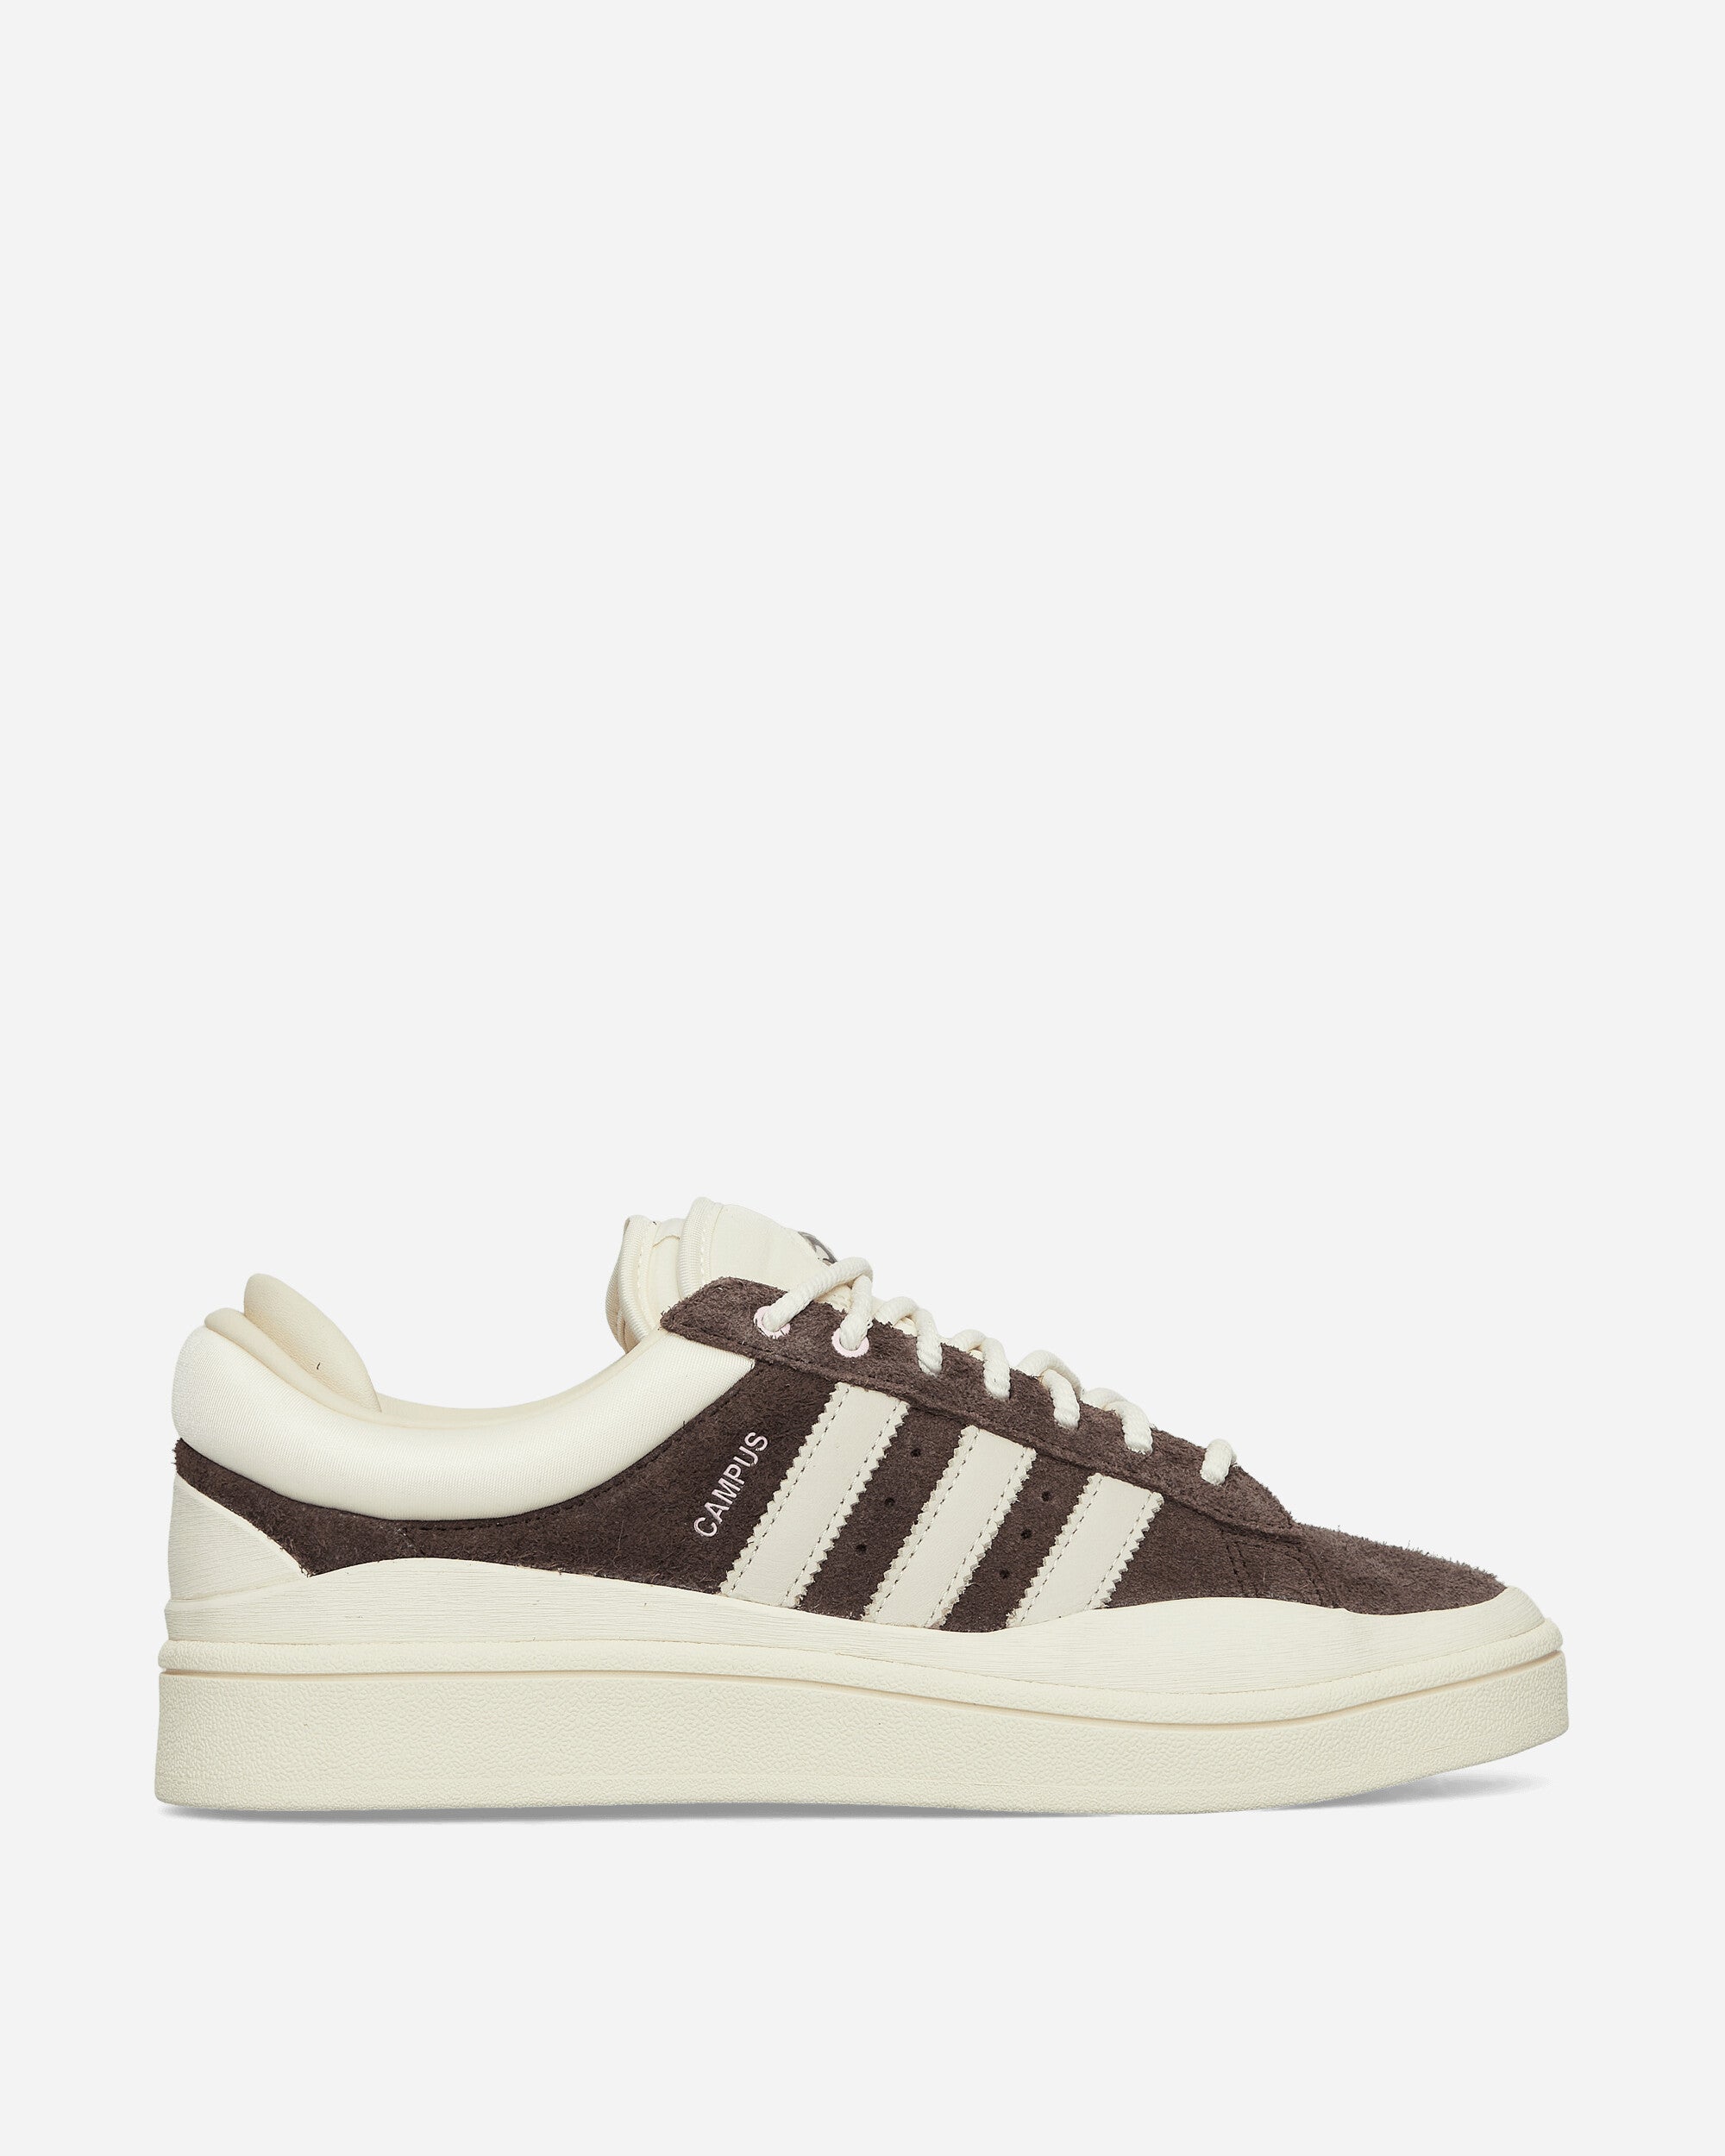 adidas Bad Bunny Campus Dark Brown/Chalk White Sneakers Low ID2534 001